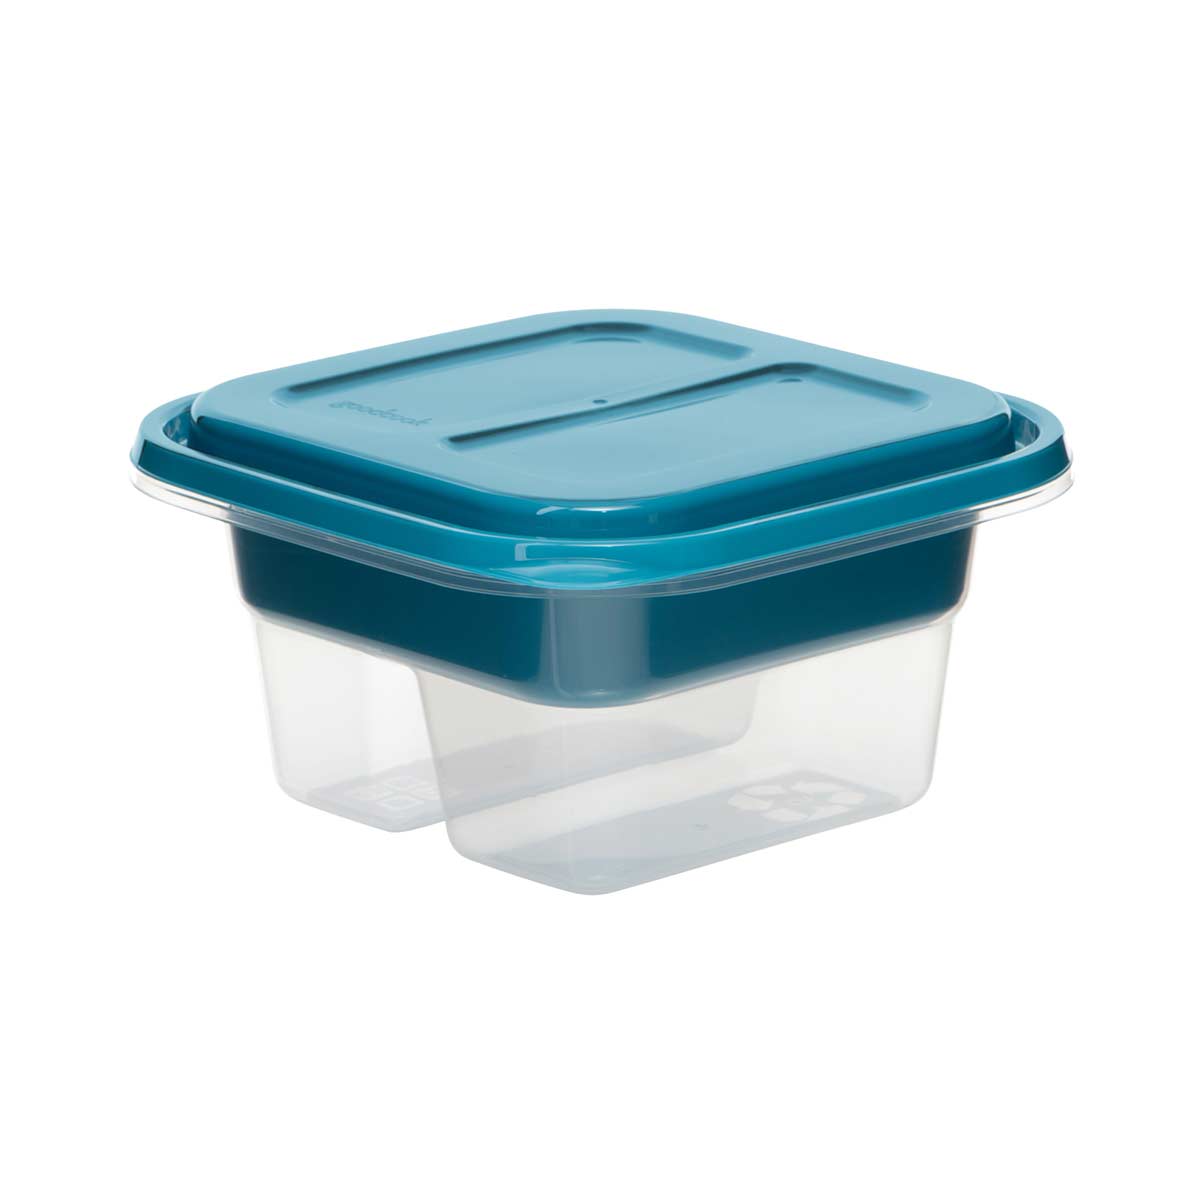 https://www.goodcook.com/media/catalog/product/g/o/goodcook-everyware-lunch-cube-food-storage-container-003.jpg?auto=webp&format=pjpg